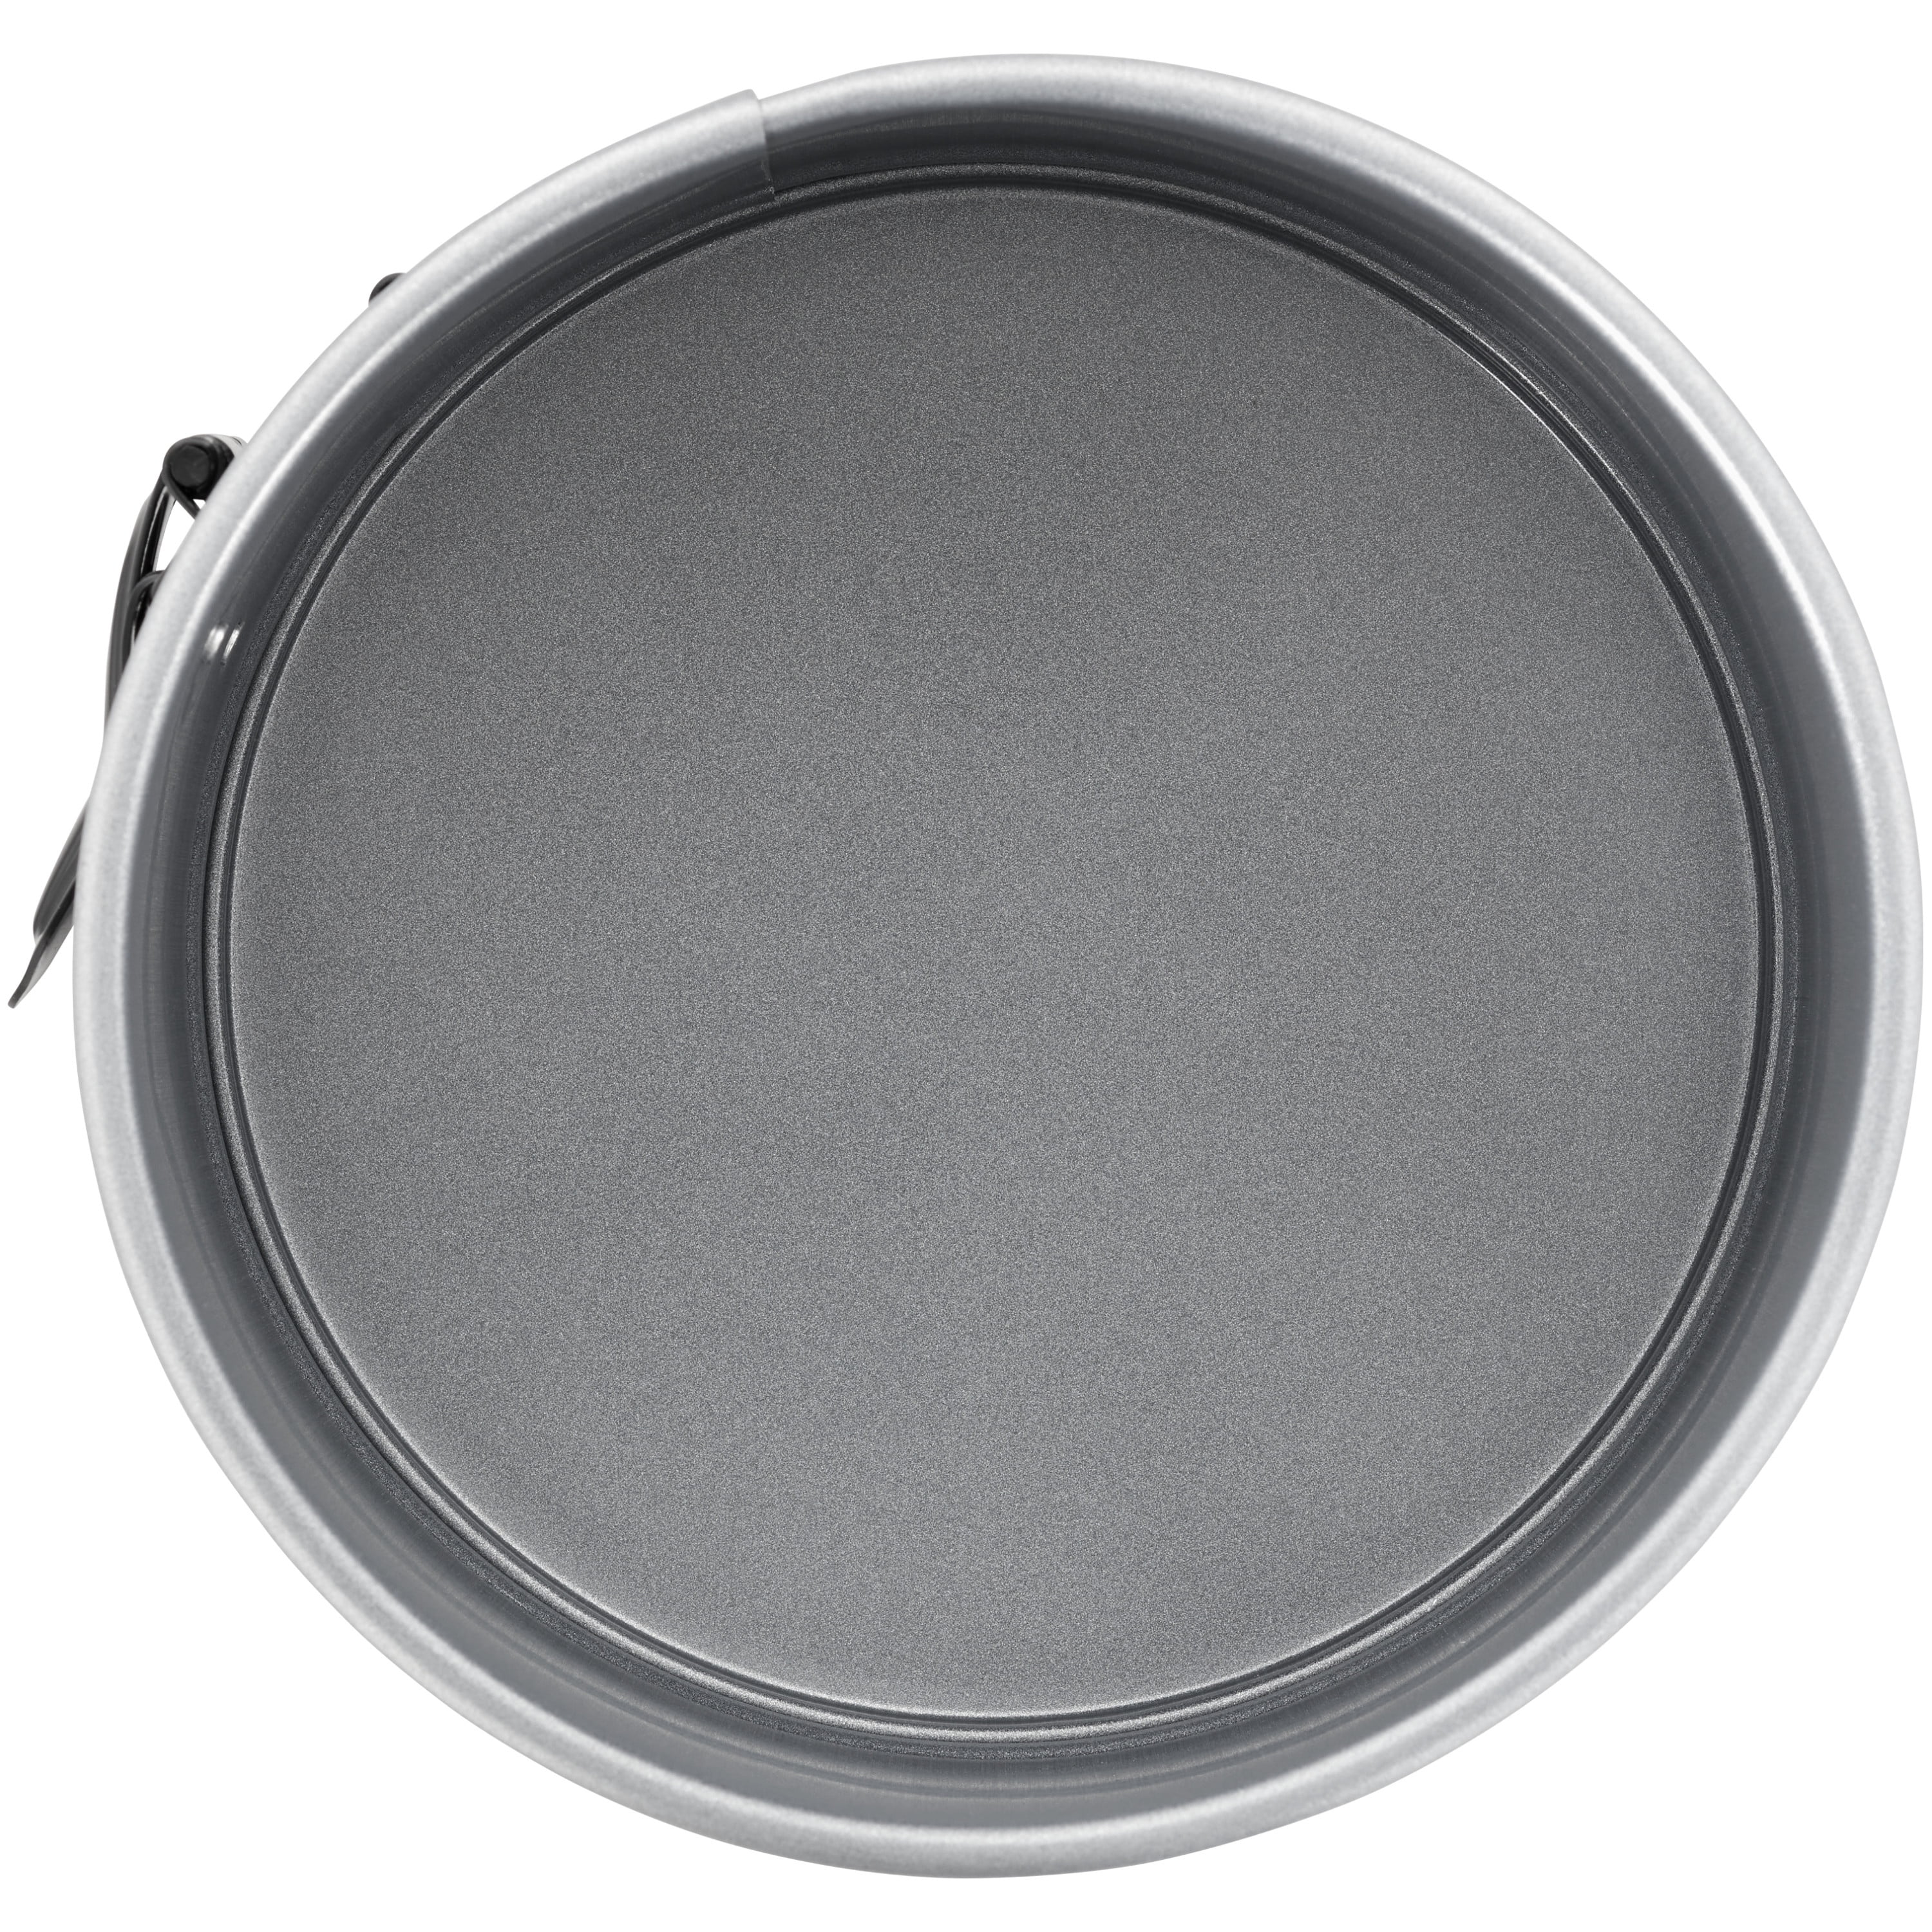 The 6 Best Springform Pans, Tested and Reviewed